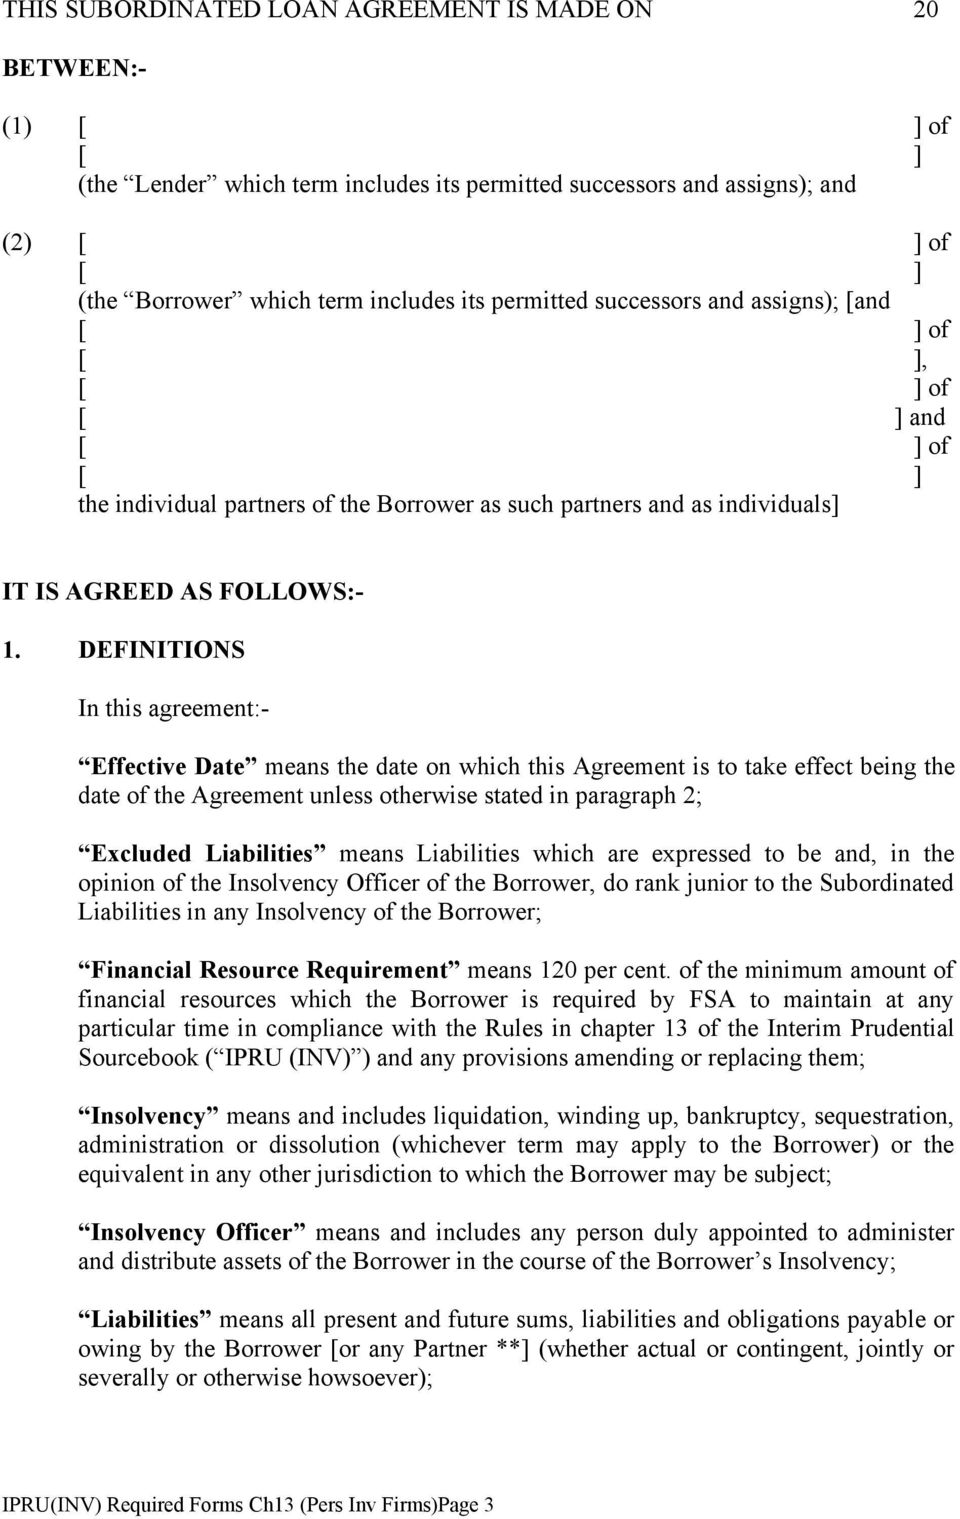 DEFINITIONS In this agreement:- Effective Date means the date on which this Agreement is to take effect being the date of the Agreement unless otherwise stated in paragraph 2; Excluded Liabilities